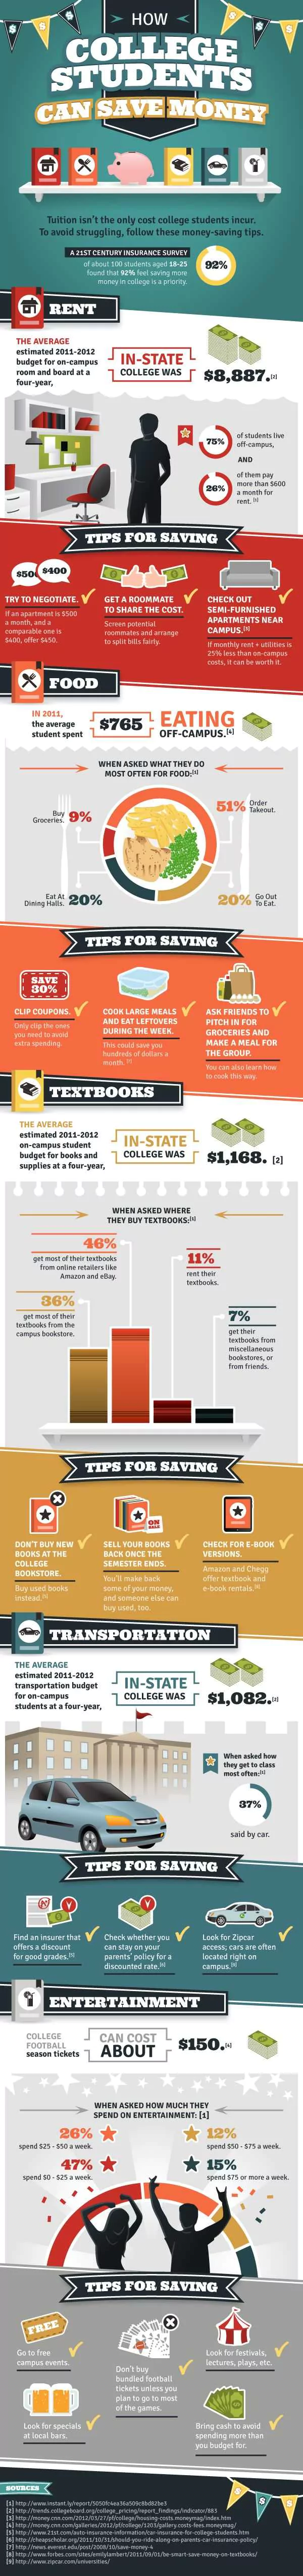 How College Students Can Save Money